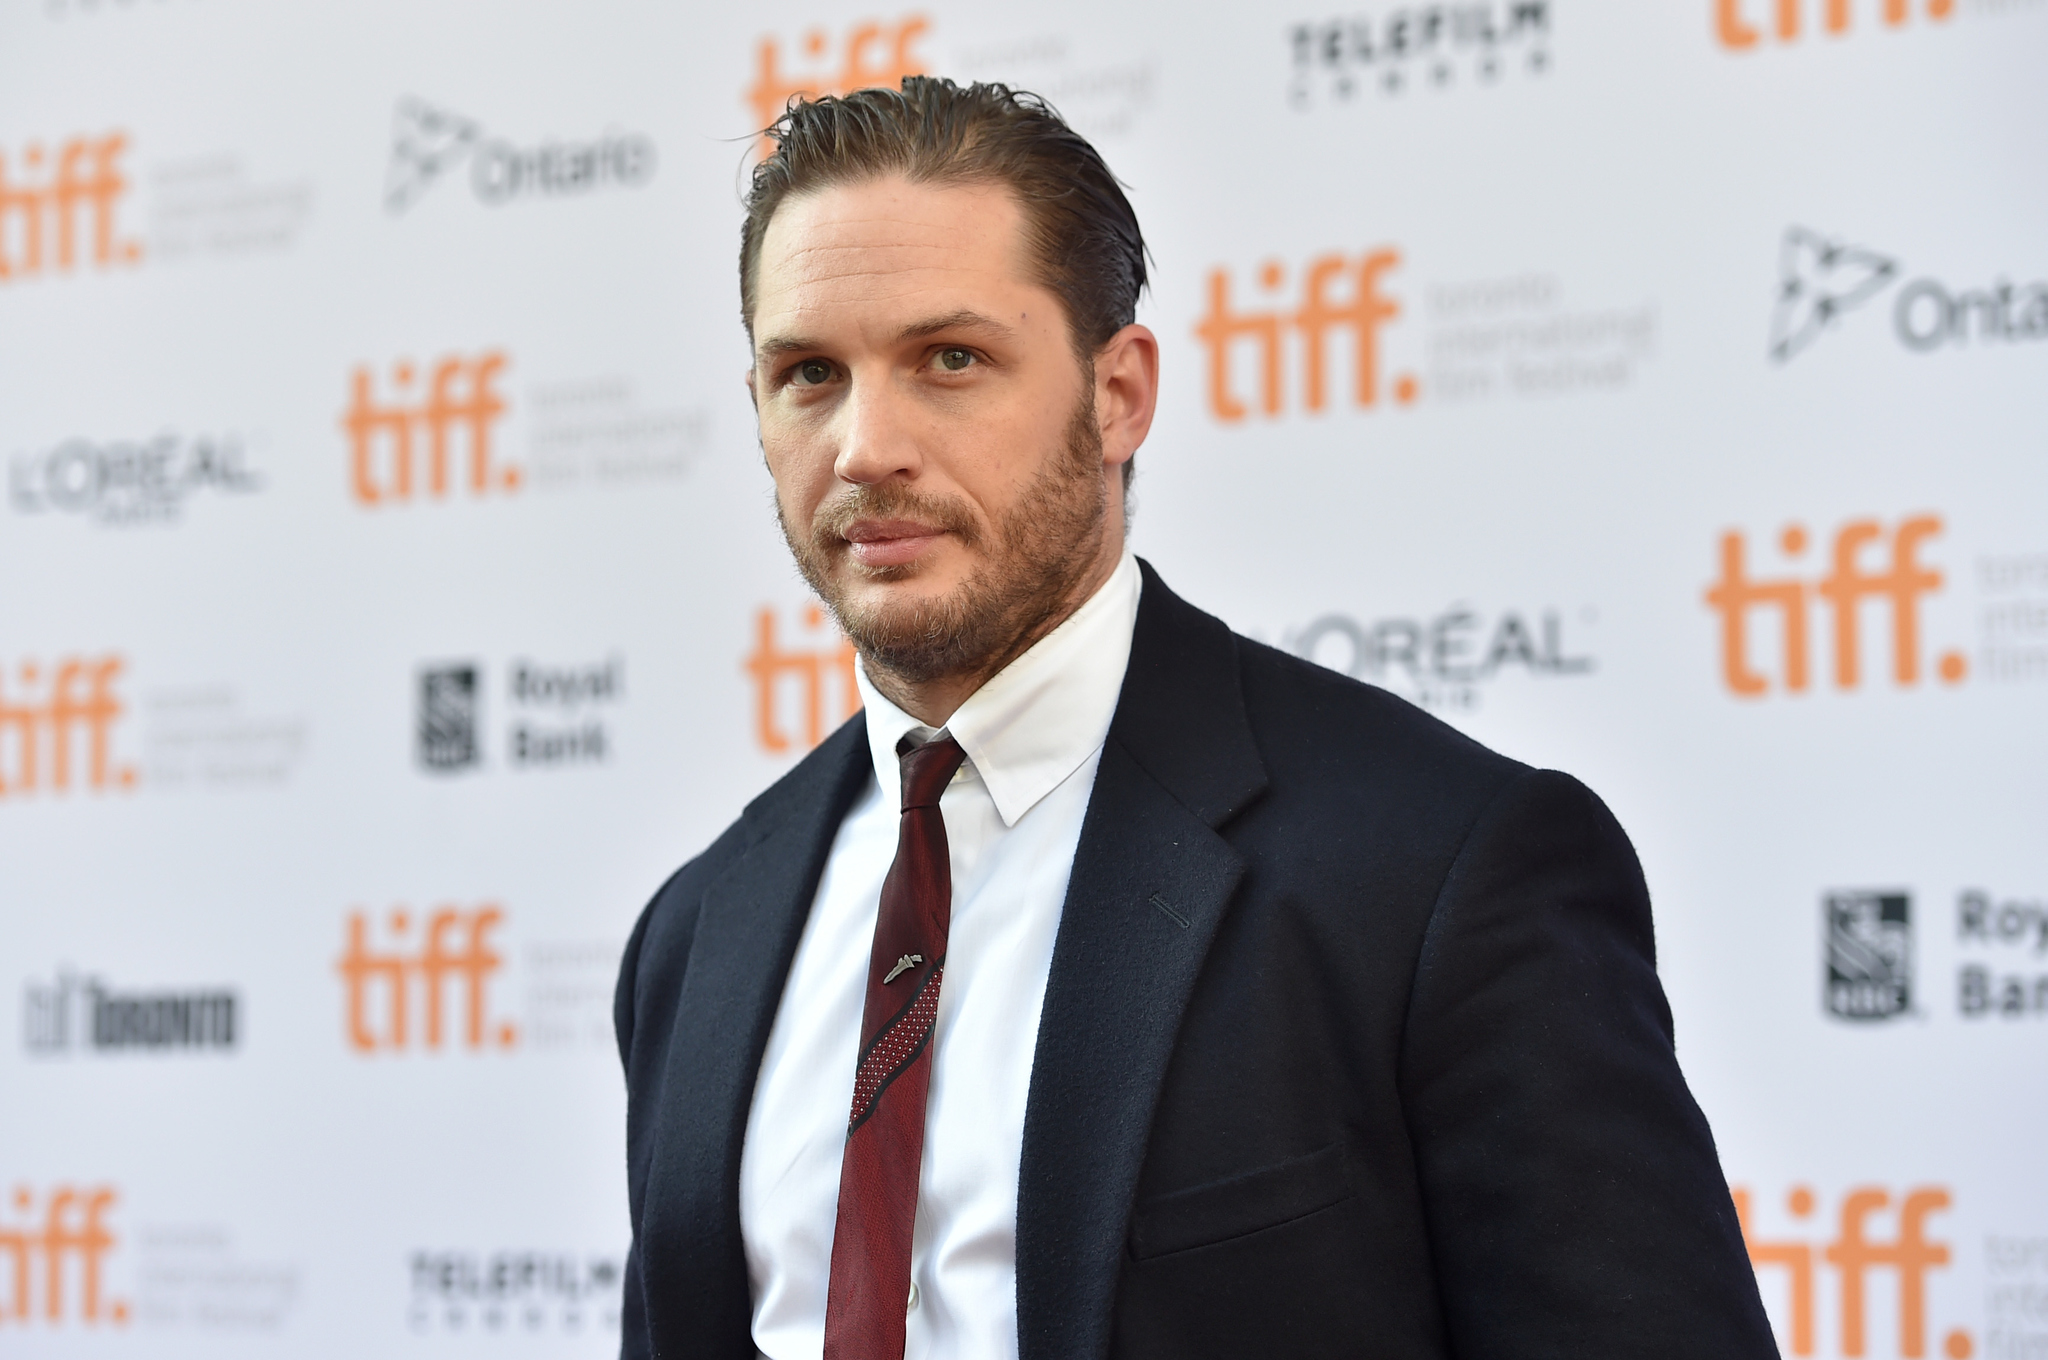 Tom Hardy at event of The Drop (2014)